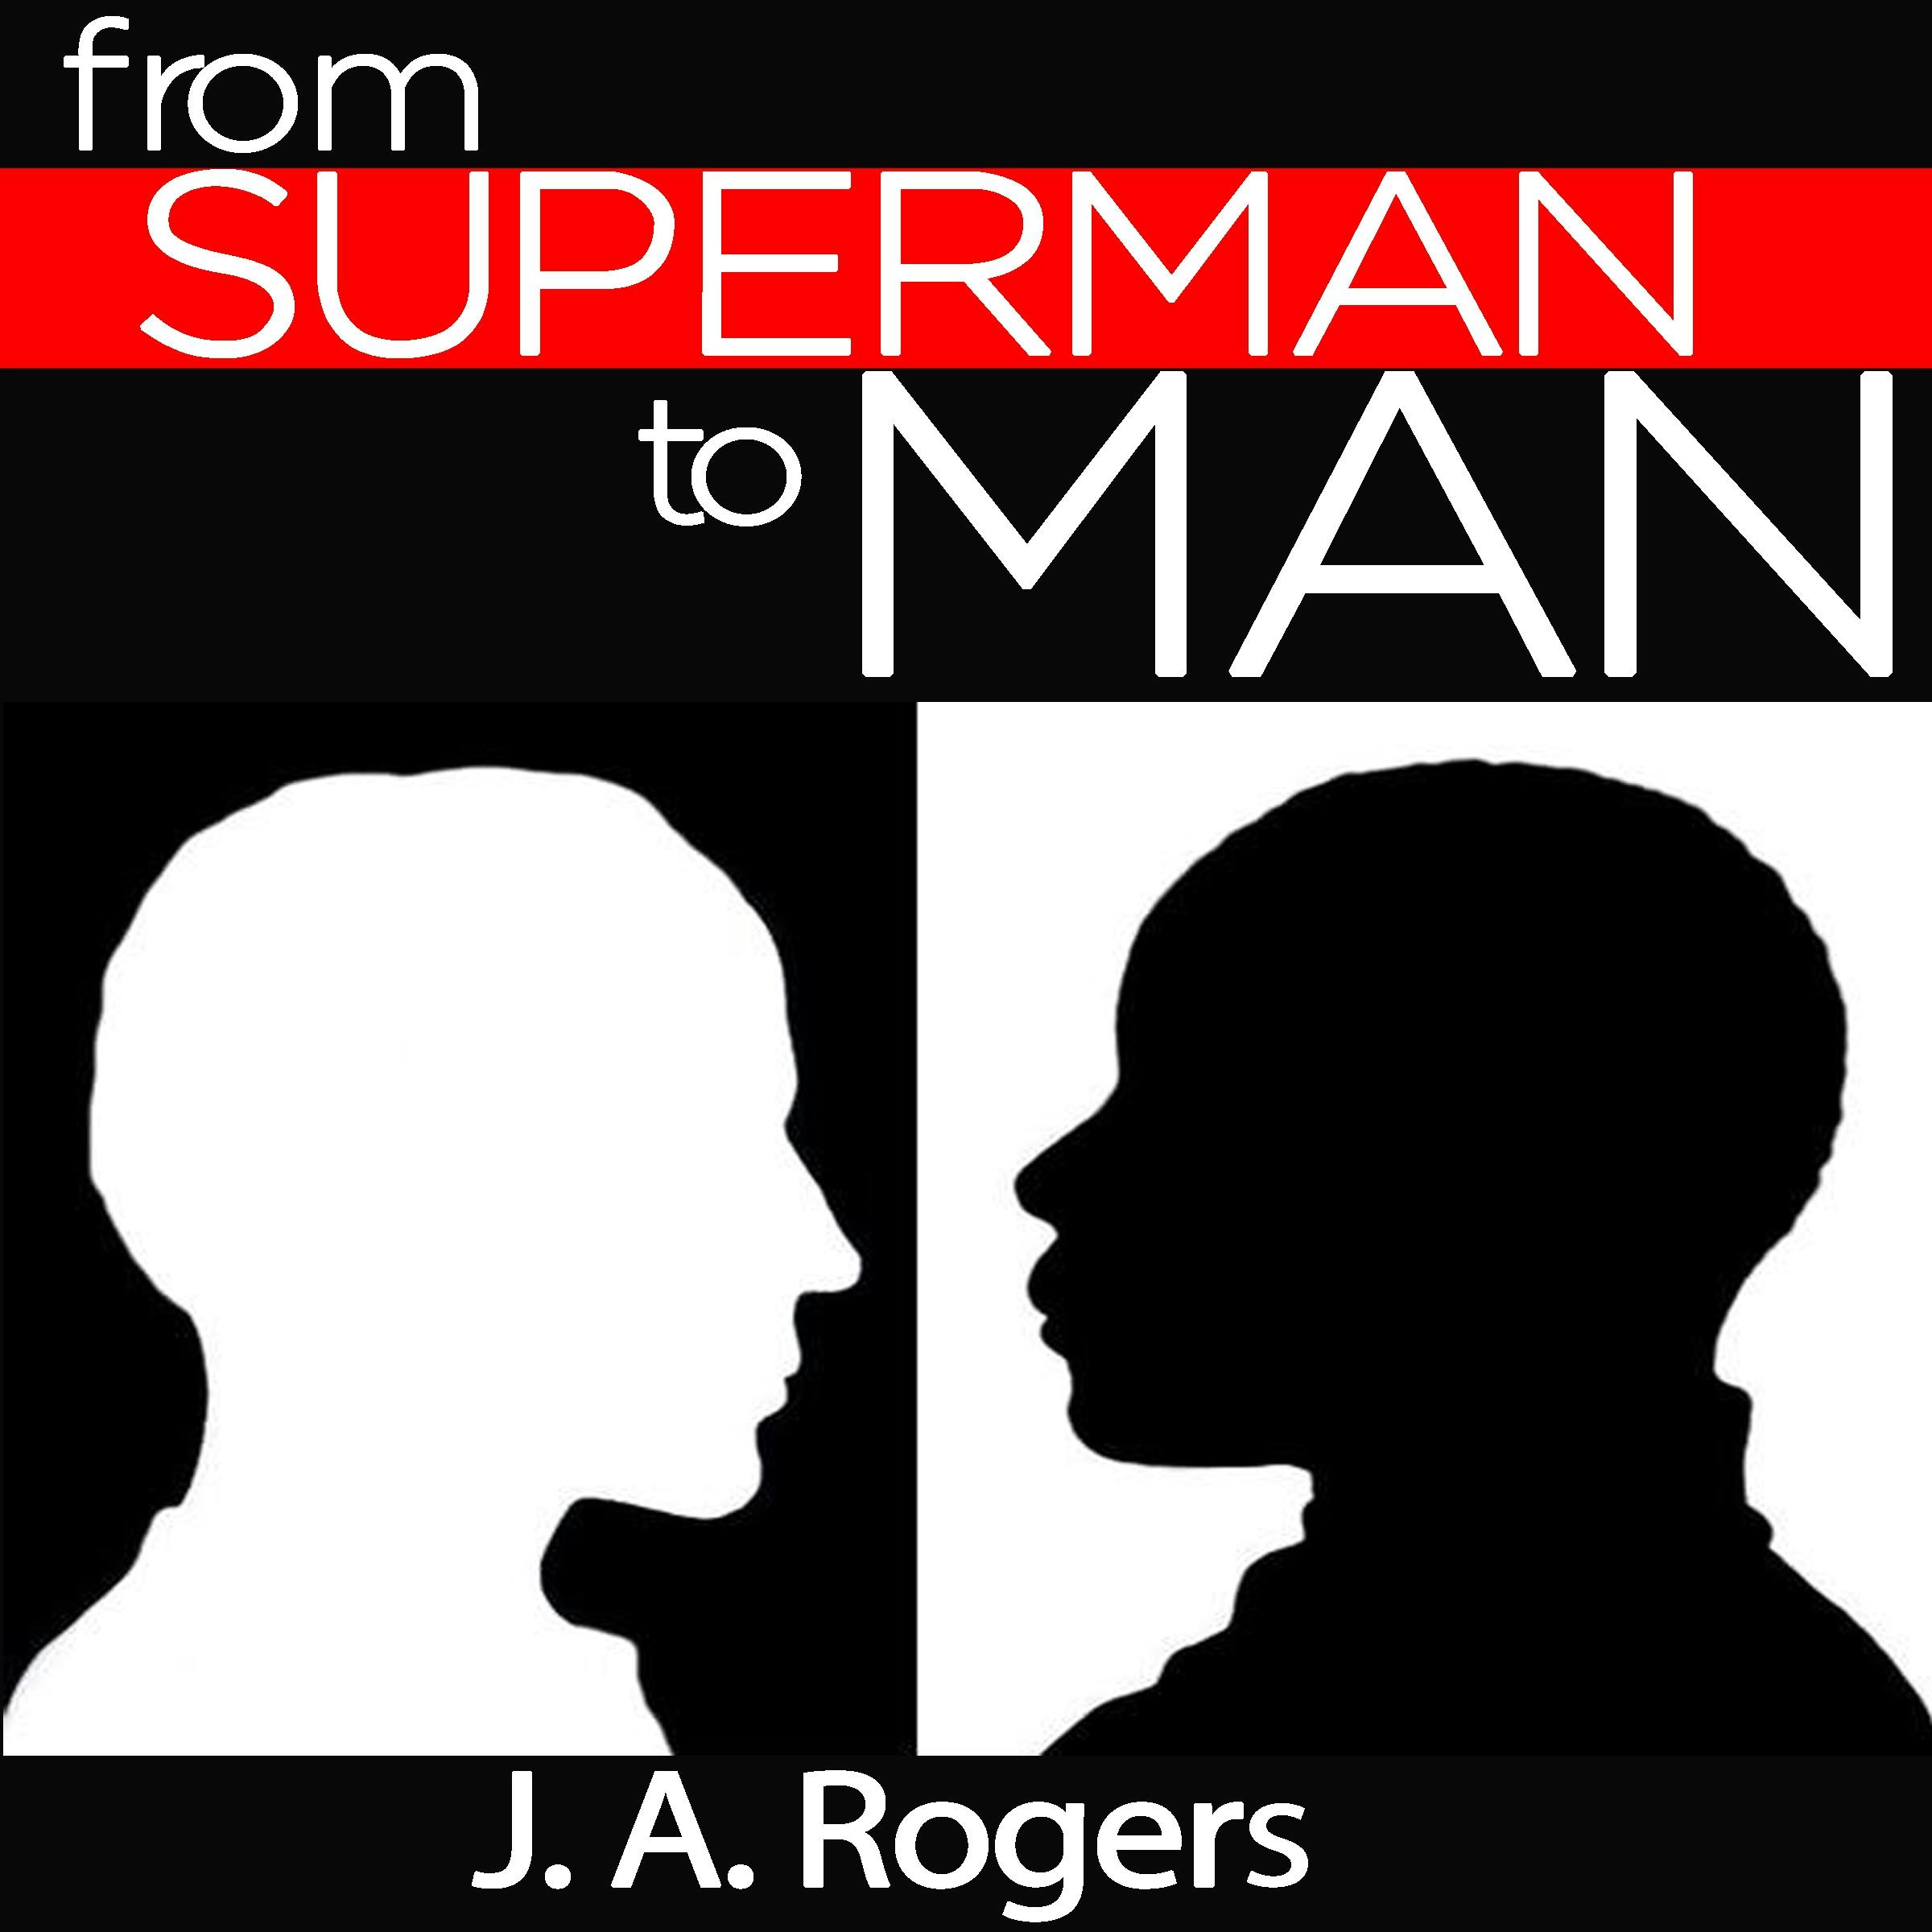 From Superman to Man - J. A. Rogers